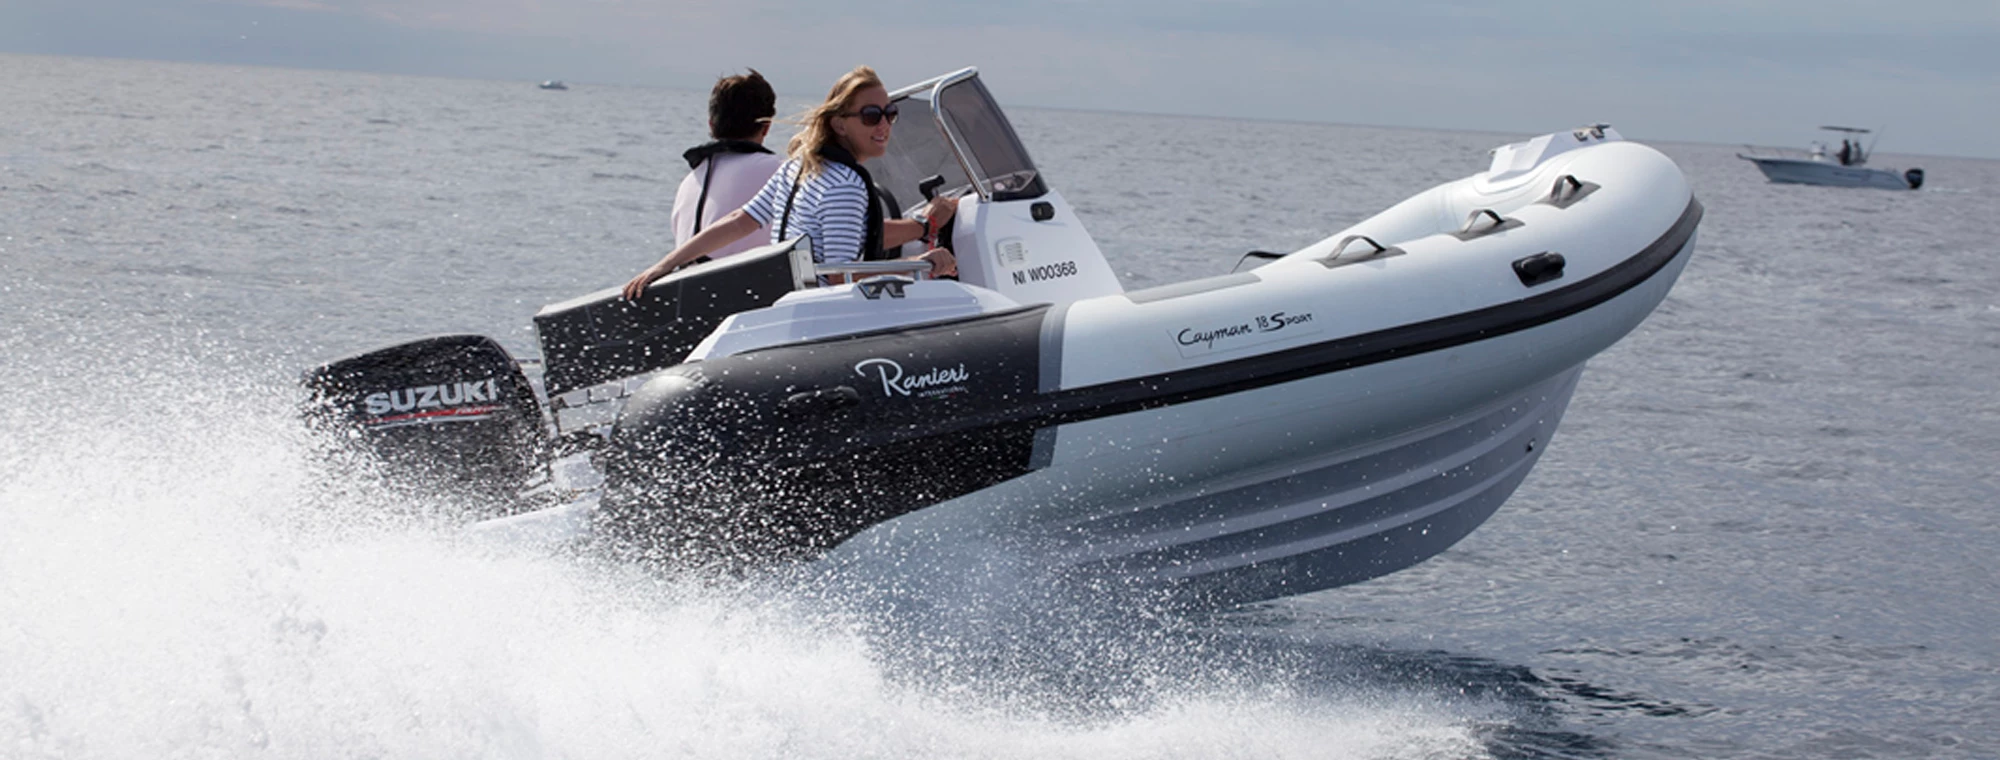 DF100B outboard on a RIB out at sea